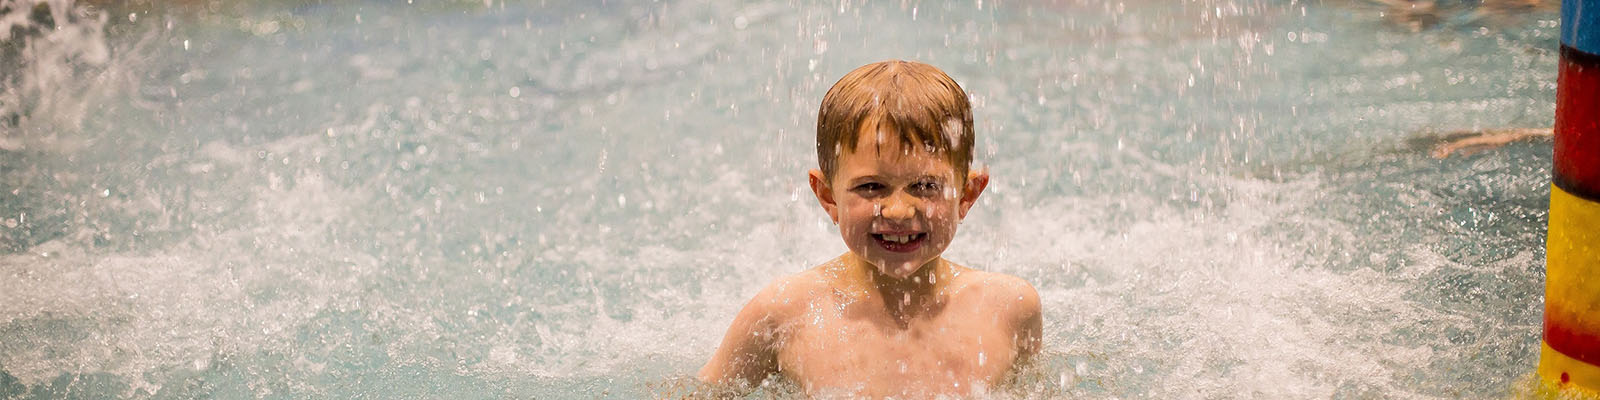 a child enjoying themselves in the pool